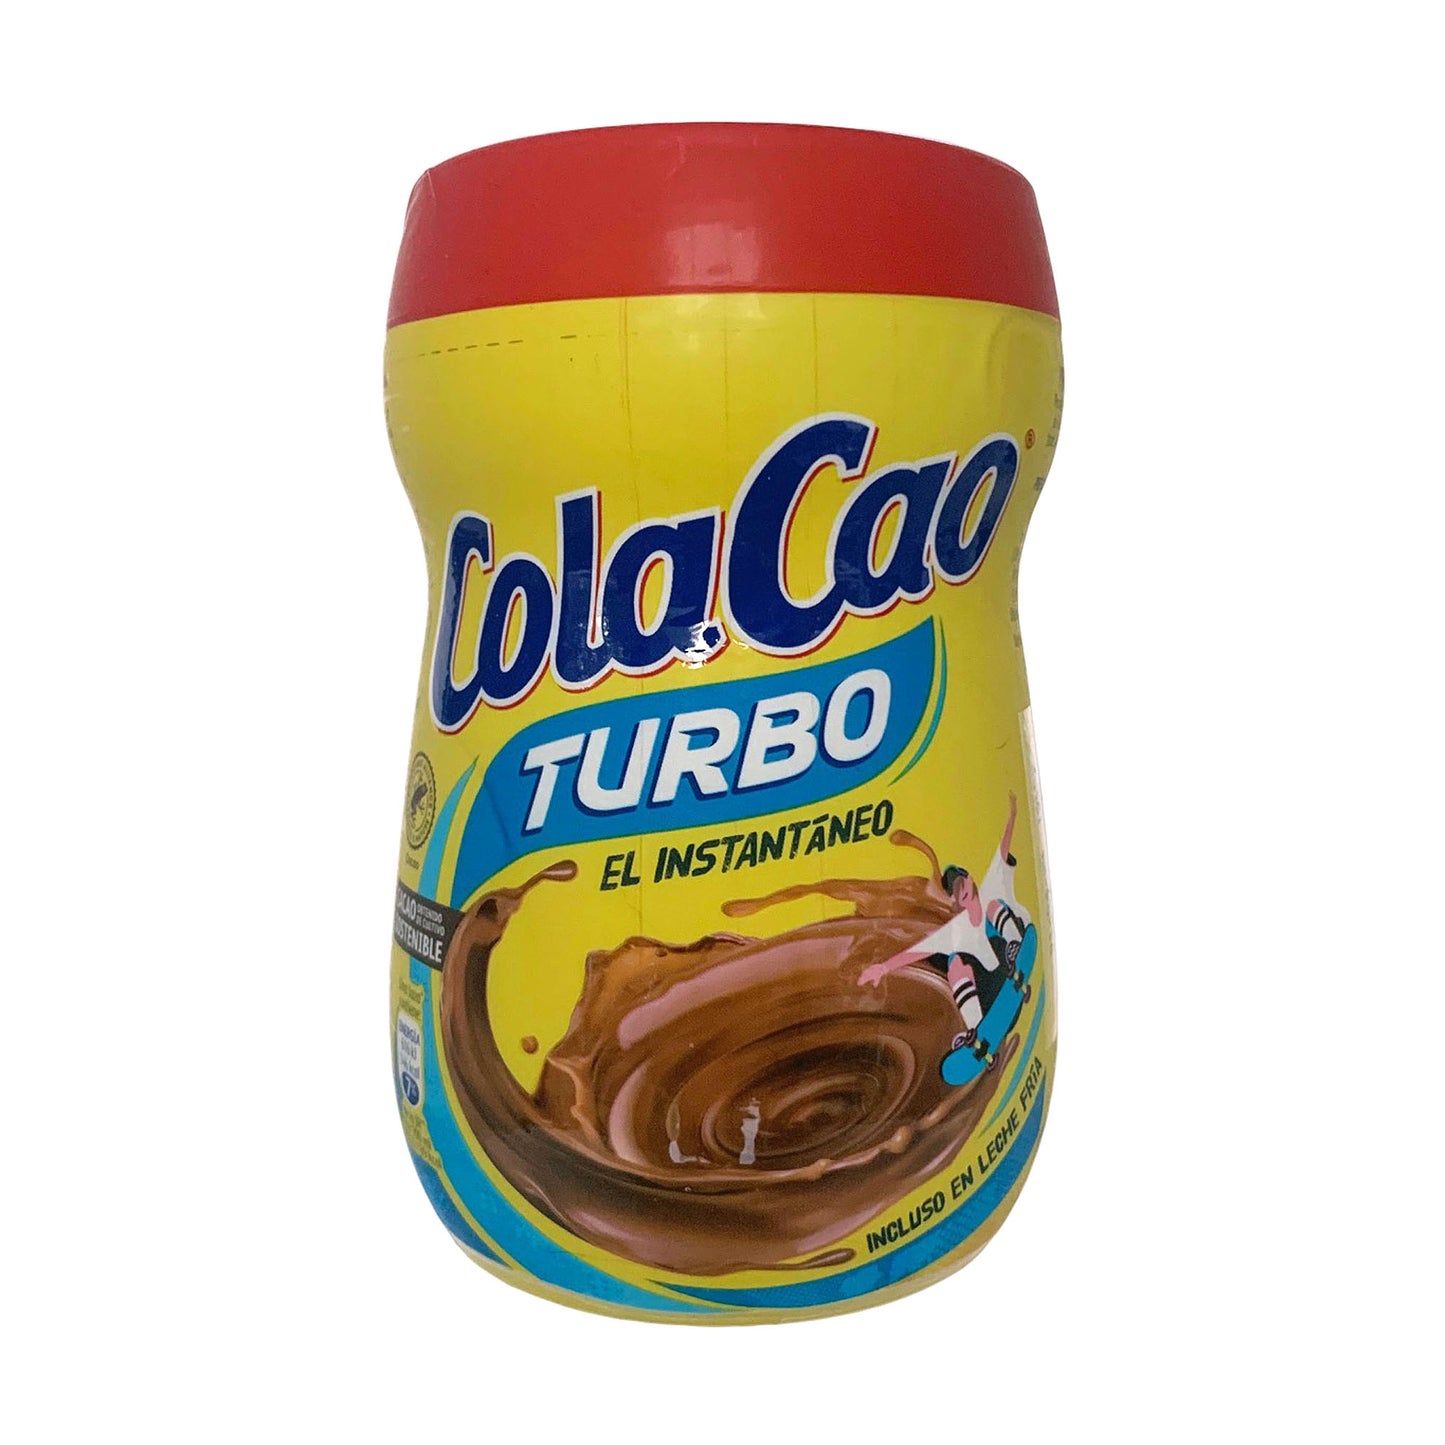 ColaCao Turbo Instant Hot or Cold Chocolate Drink Mix from Spain 375g